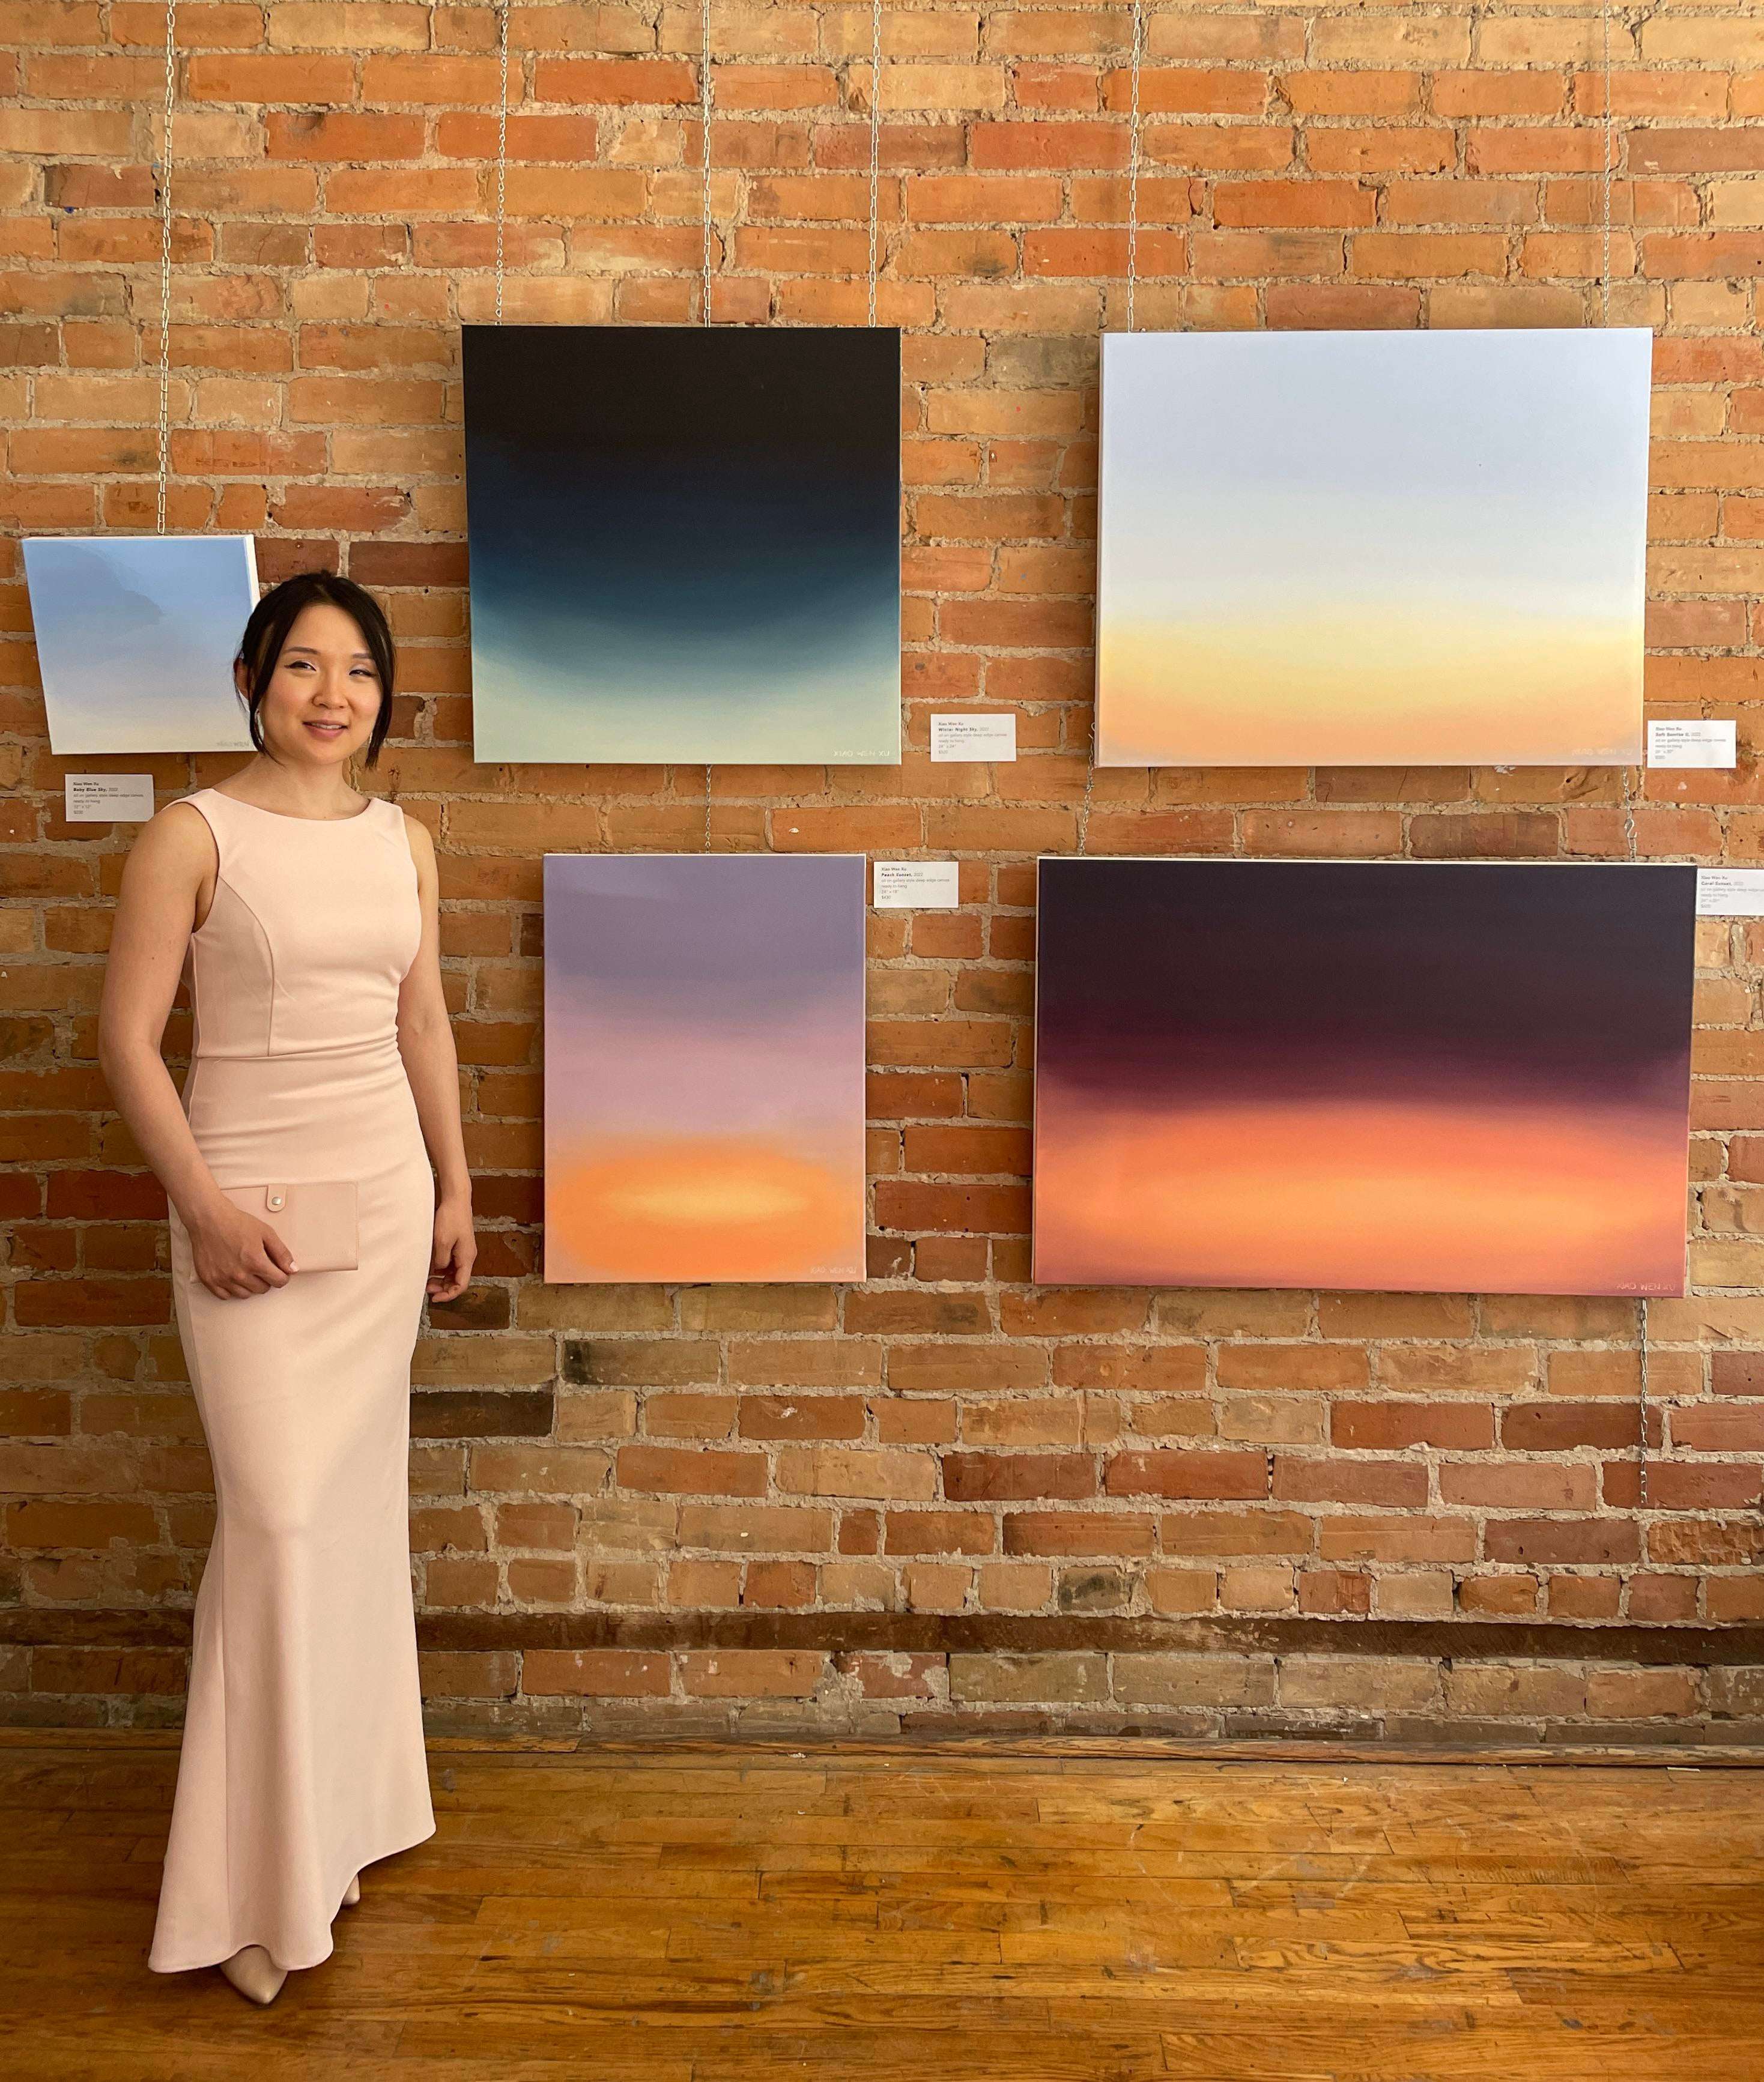 image showing At my debut solo art exhibit at the Show Gallery at 978 Queen Street West in Toronto.